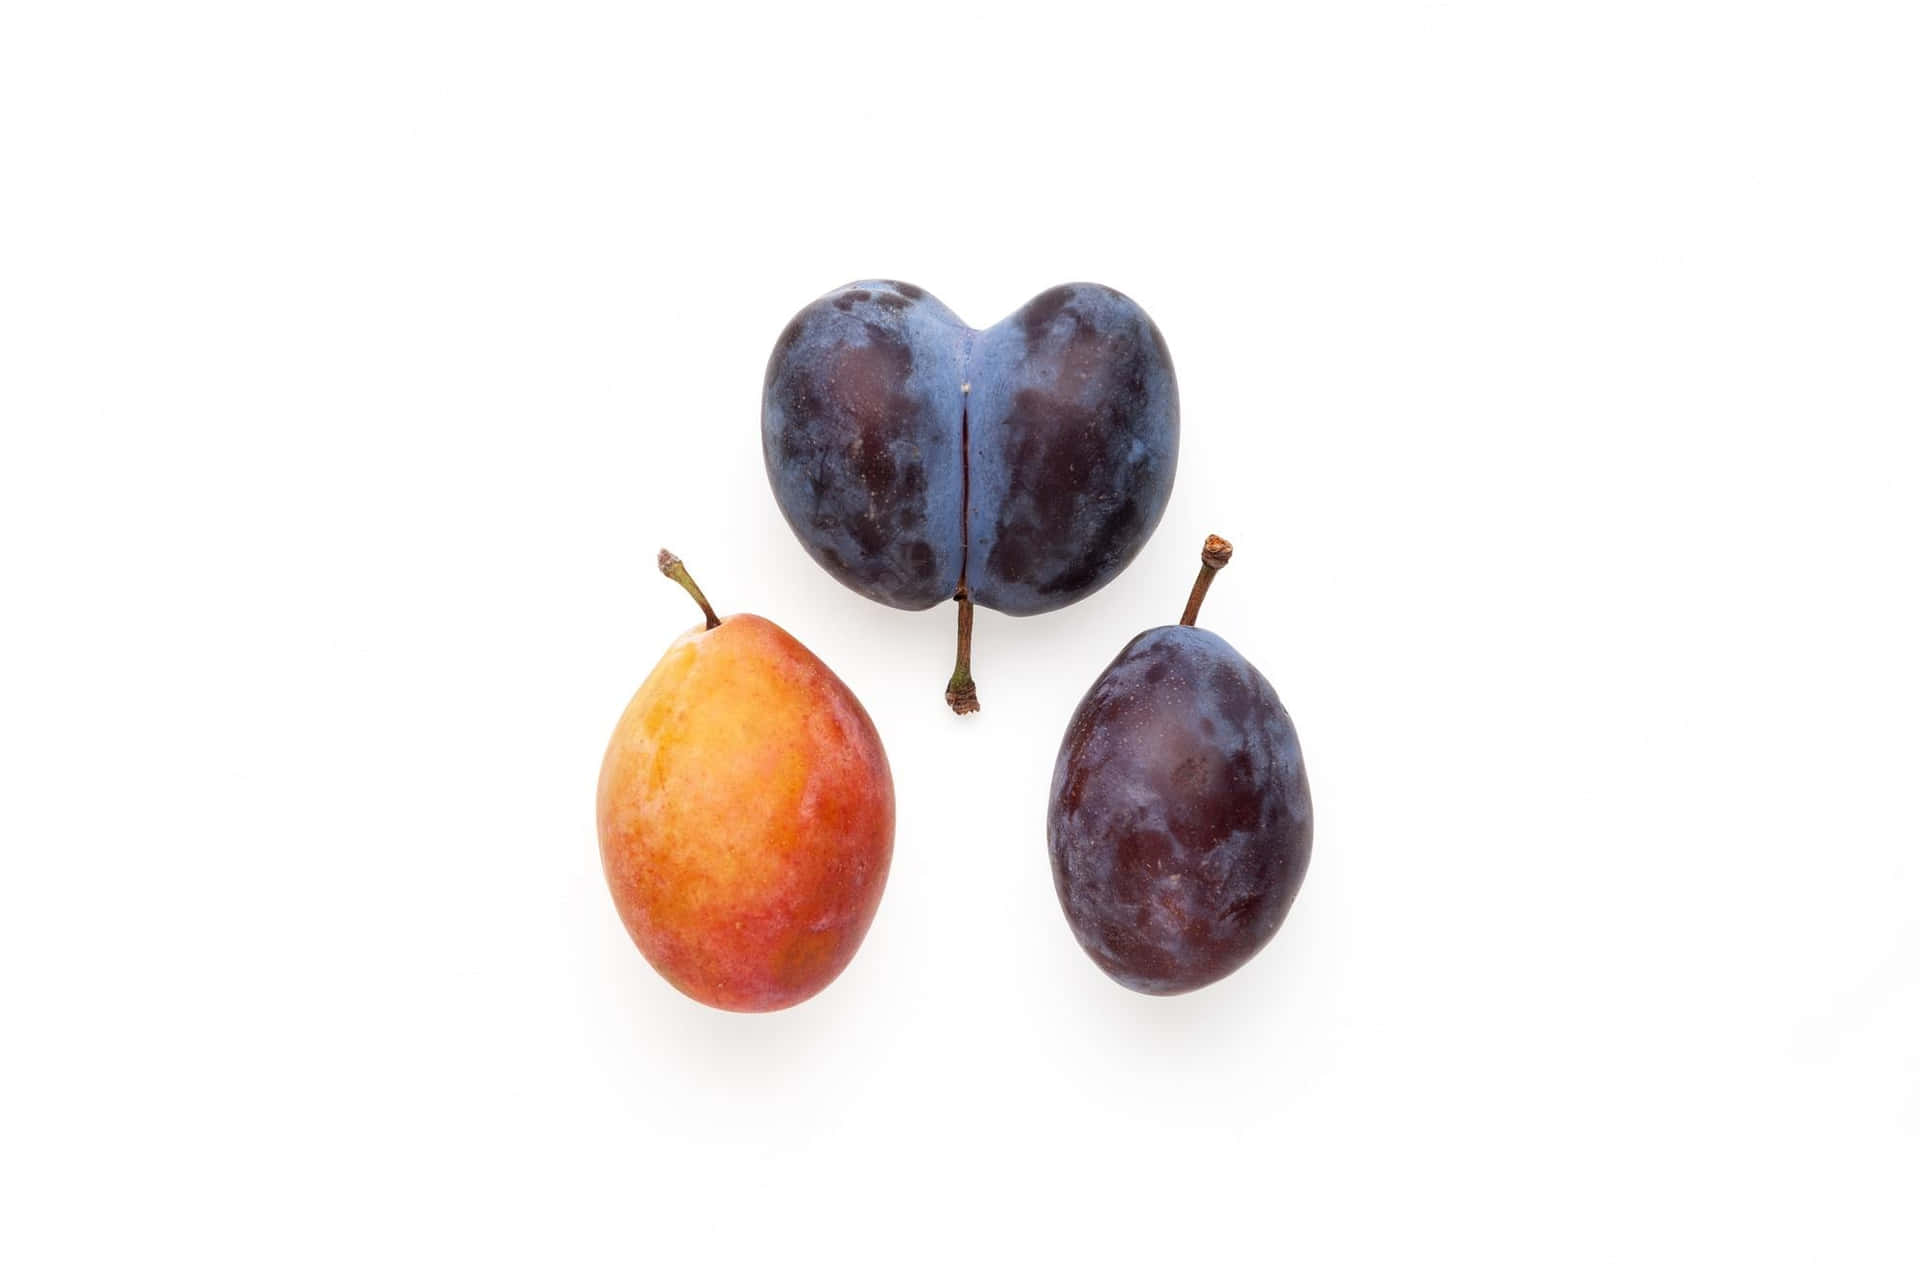 Orange And Conjoined Damson Plum Fruits Wallpaper